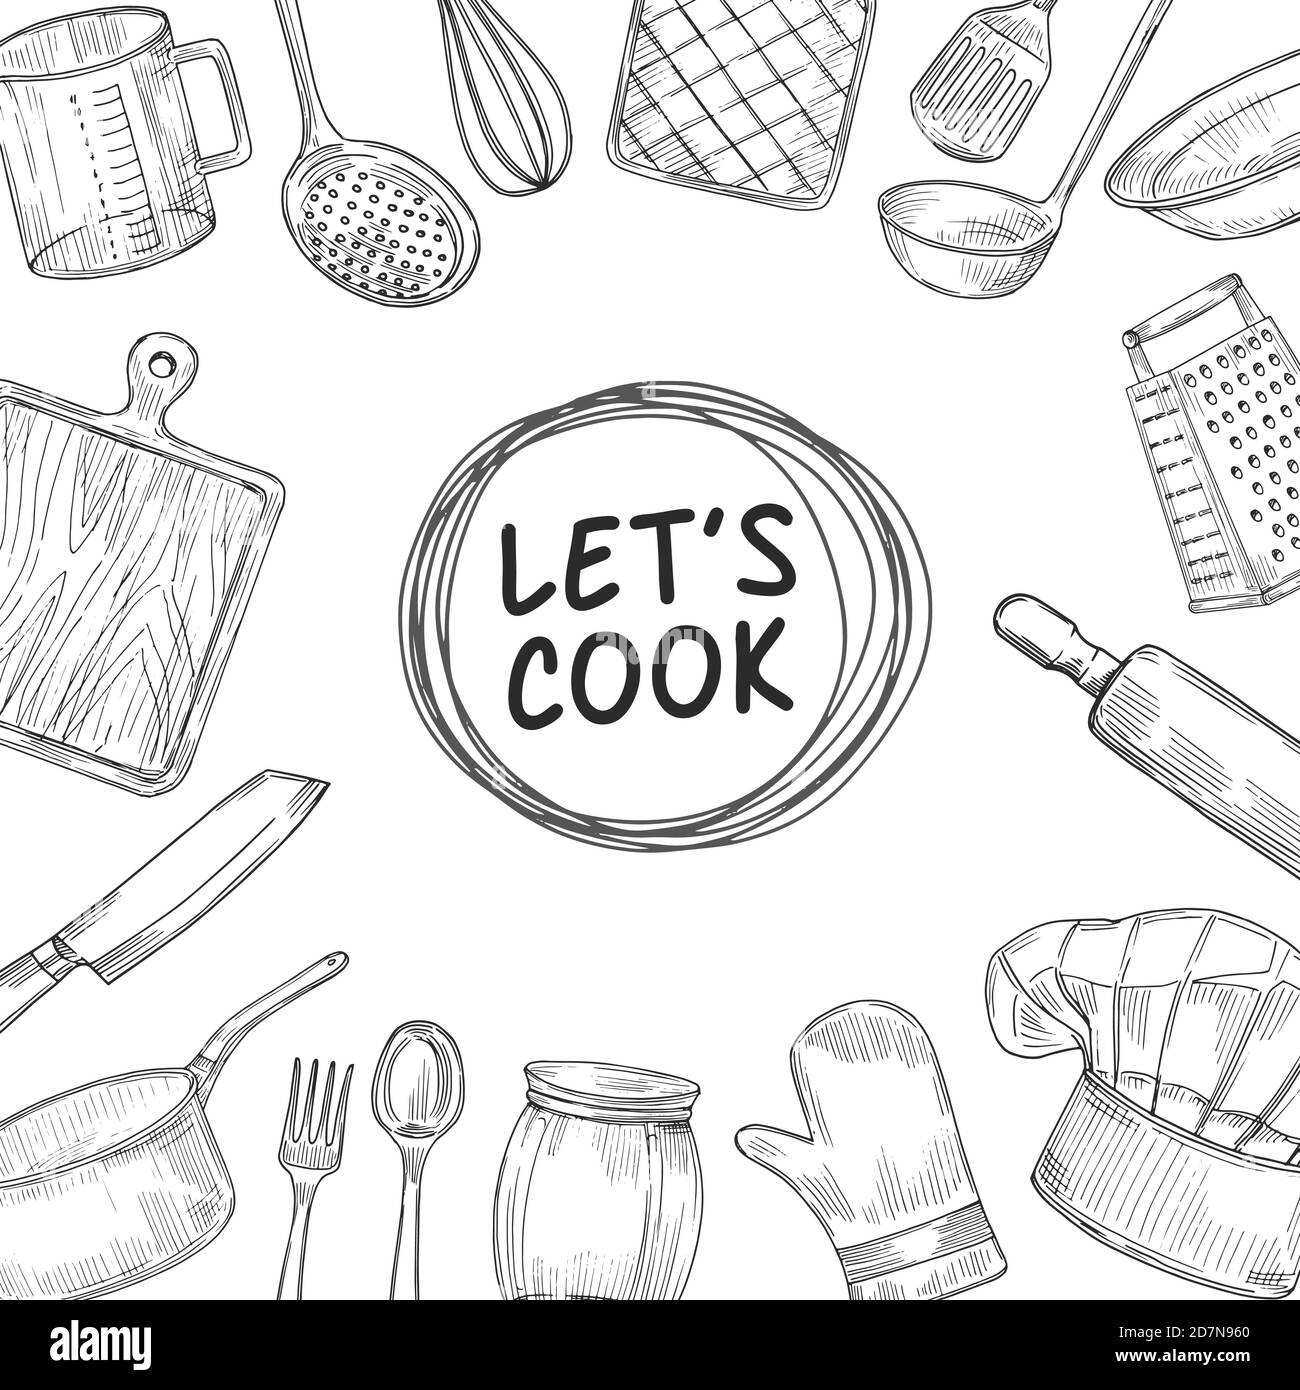 Kitchen Tools Ink Clipart Set Cooking Utensils Line Drawings, Hi Res Art  Black Doodle Illustrations, Transparent Pngs and EPS Vector 